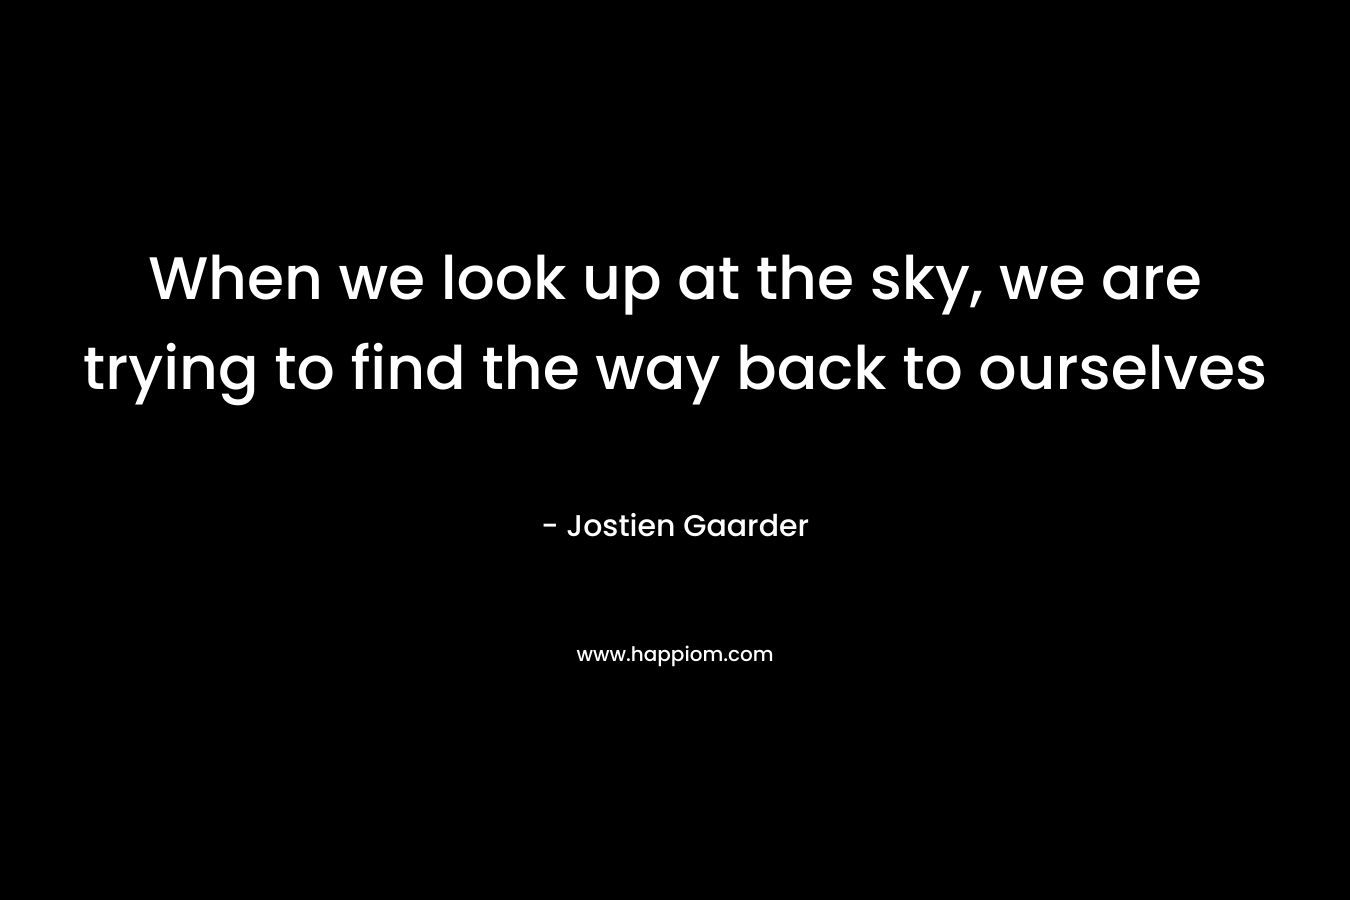 When we look up at the sky, we are trying to find the way back to ourselves